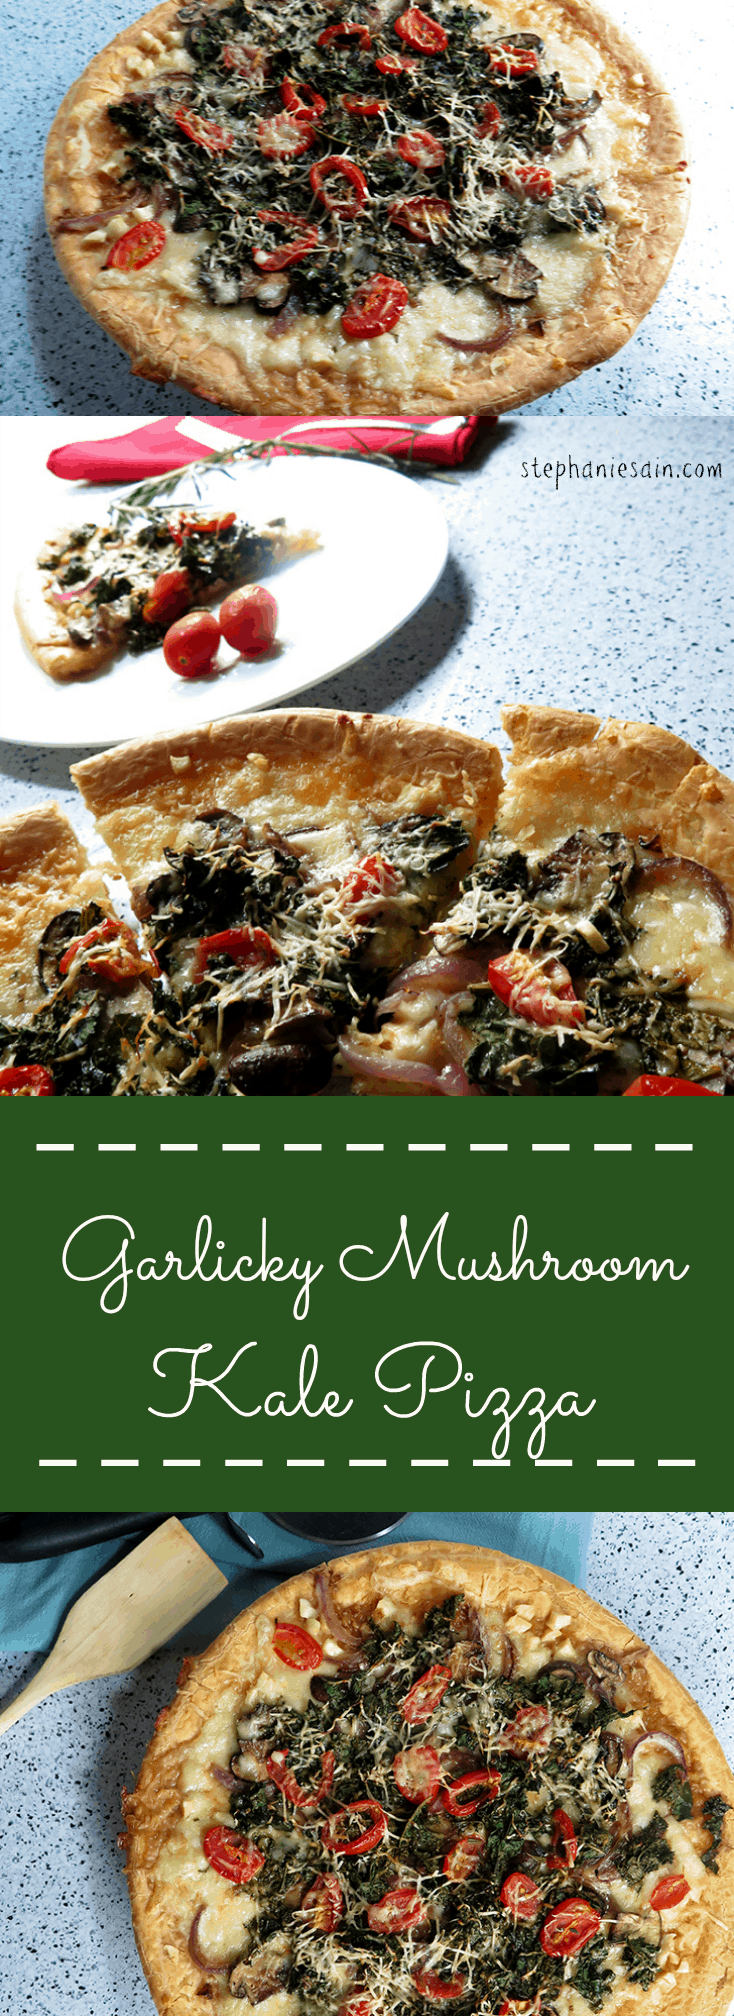 Garlicky Mushroom Kale Pizza is a great way to eat Kale. It's a healthier pizza prepared on a gluten free crust.(vegetarian) 